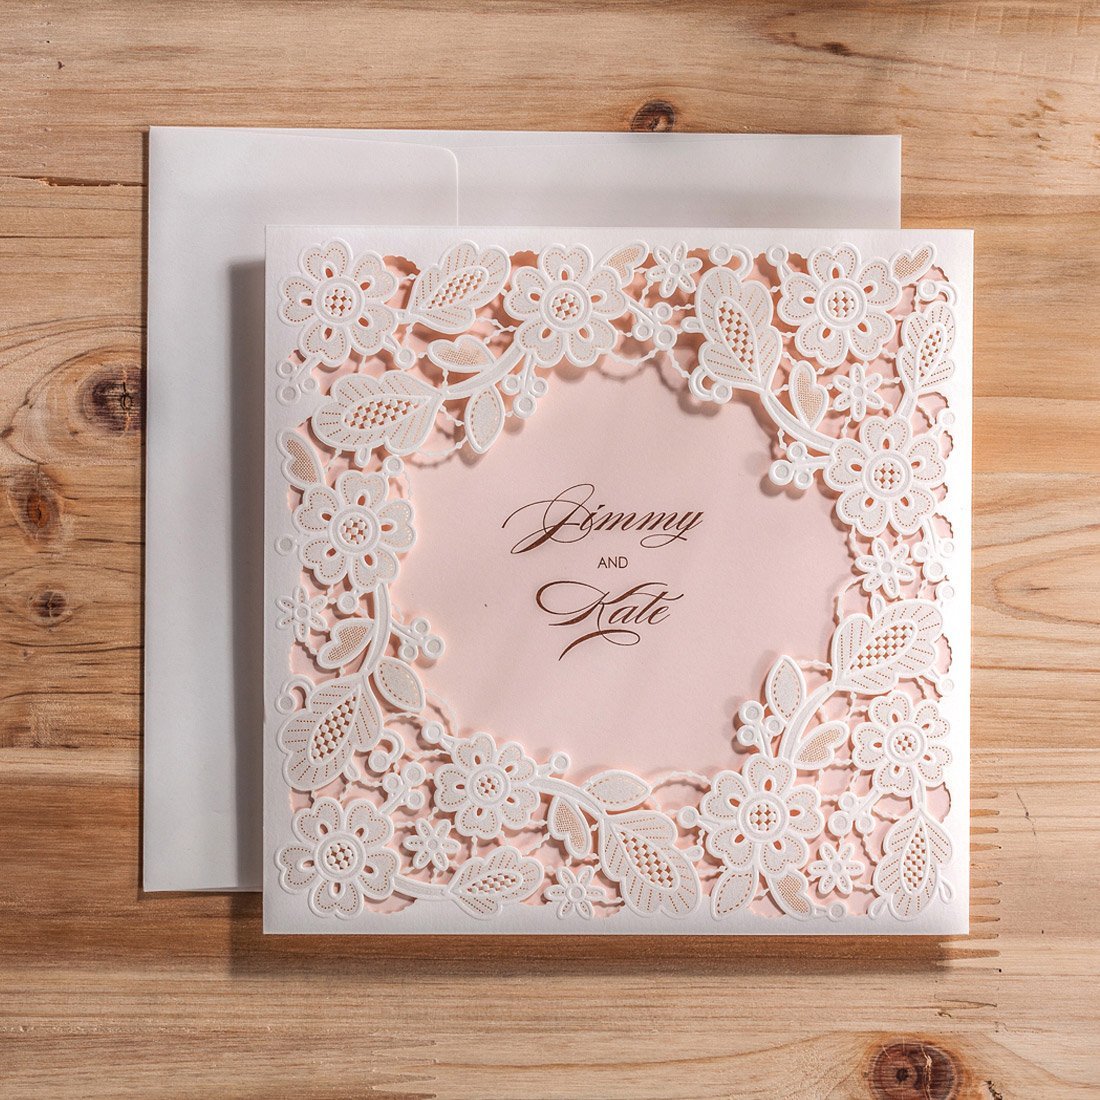 Wishmade Cheap Laser Cut  Wedding Invitation Card Kit with Heart Design Printing 